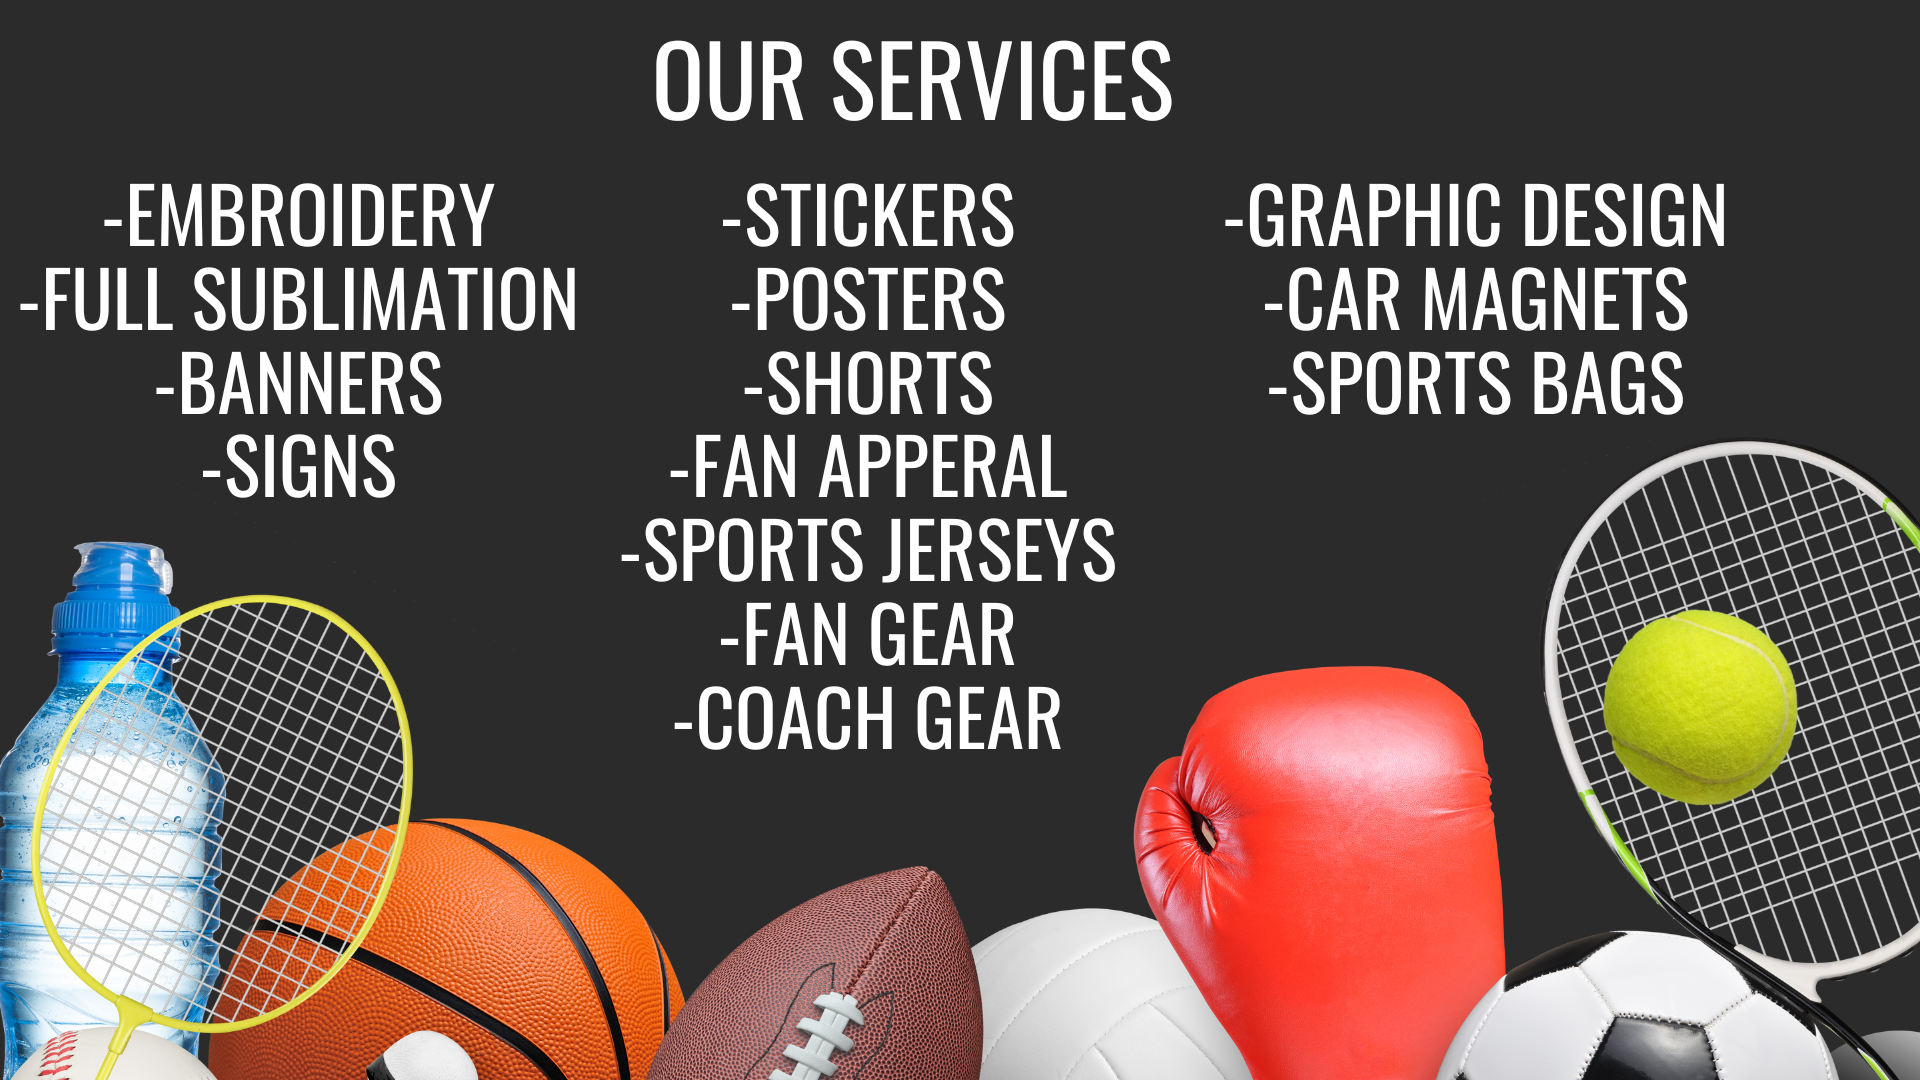 custom printing company that offers custom sports fan apparel, custom car magnets, decals, banners, signs, embroidery, full sublimation and more custom printing services 